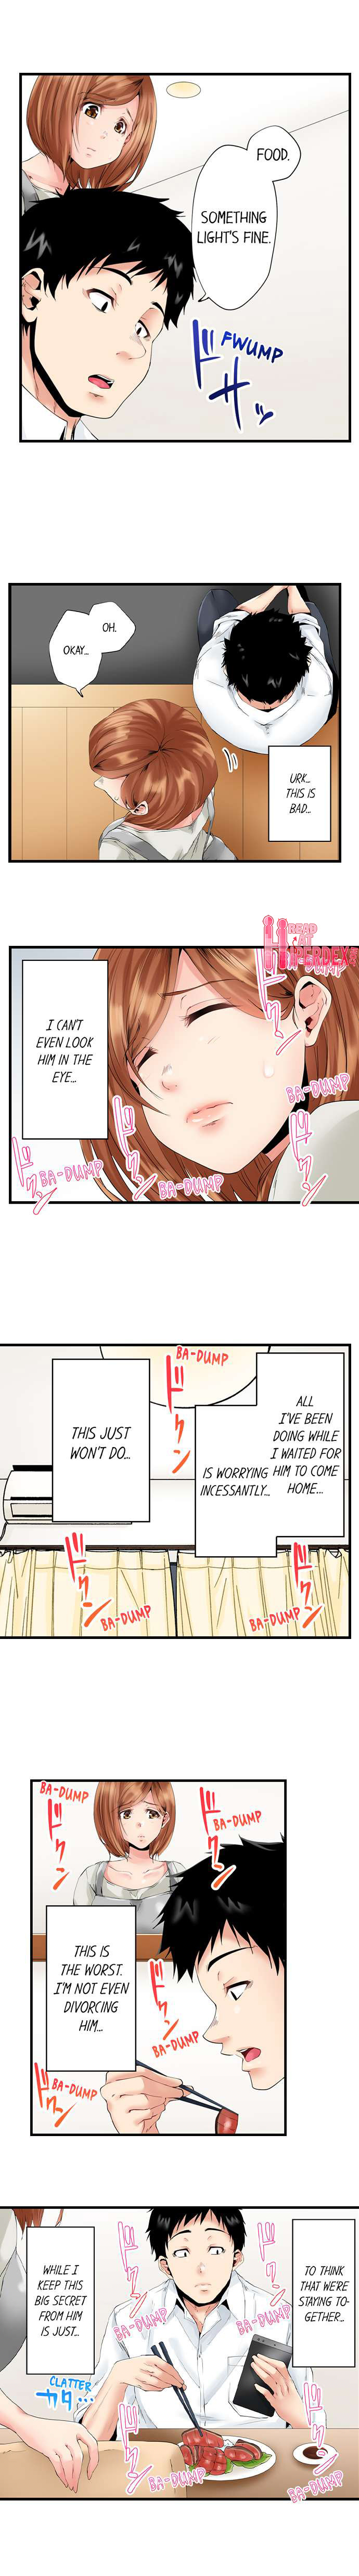 A Rebellious Girl's Sexual Instruction by Her Teacher - Chapter 4 Page 6